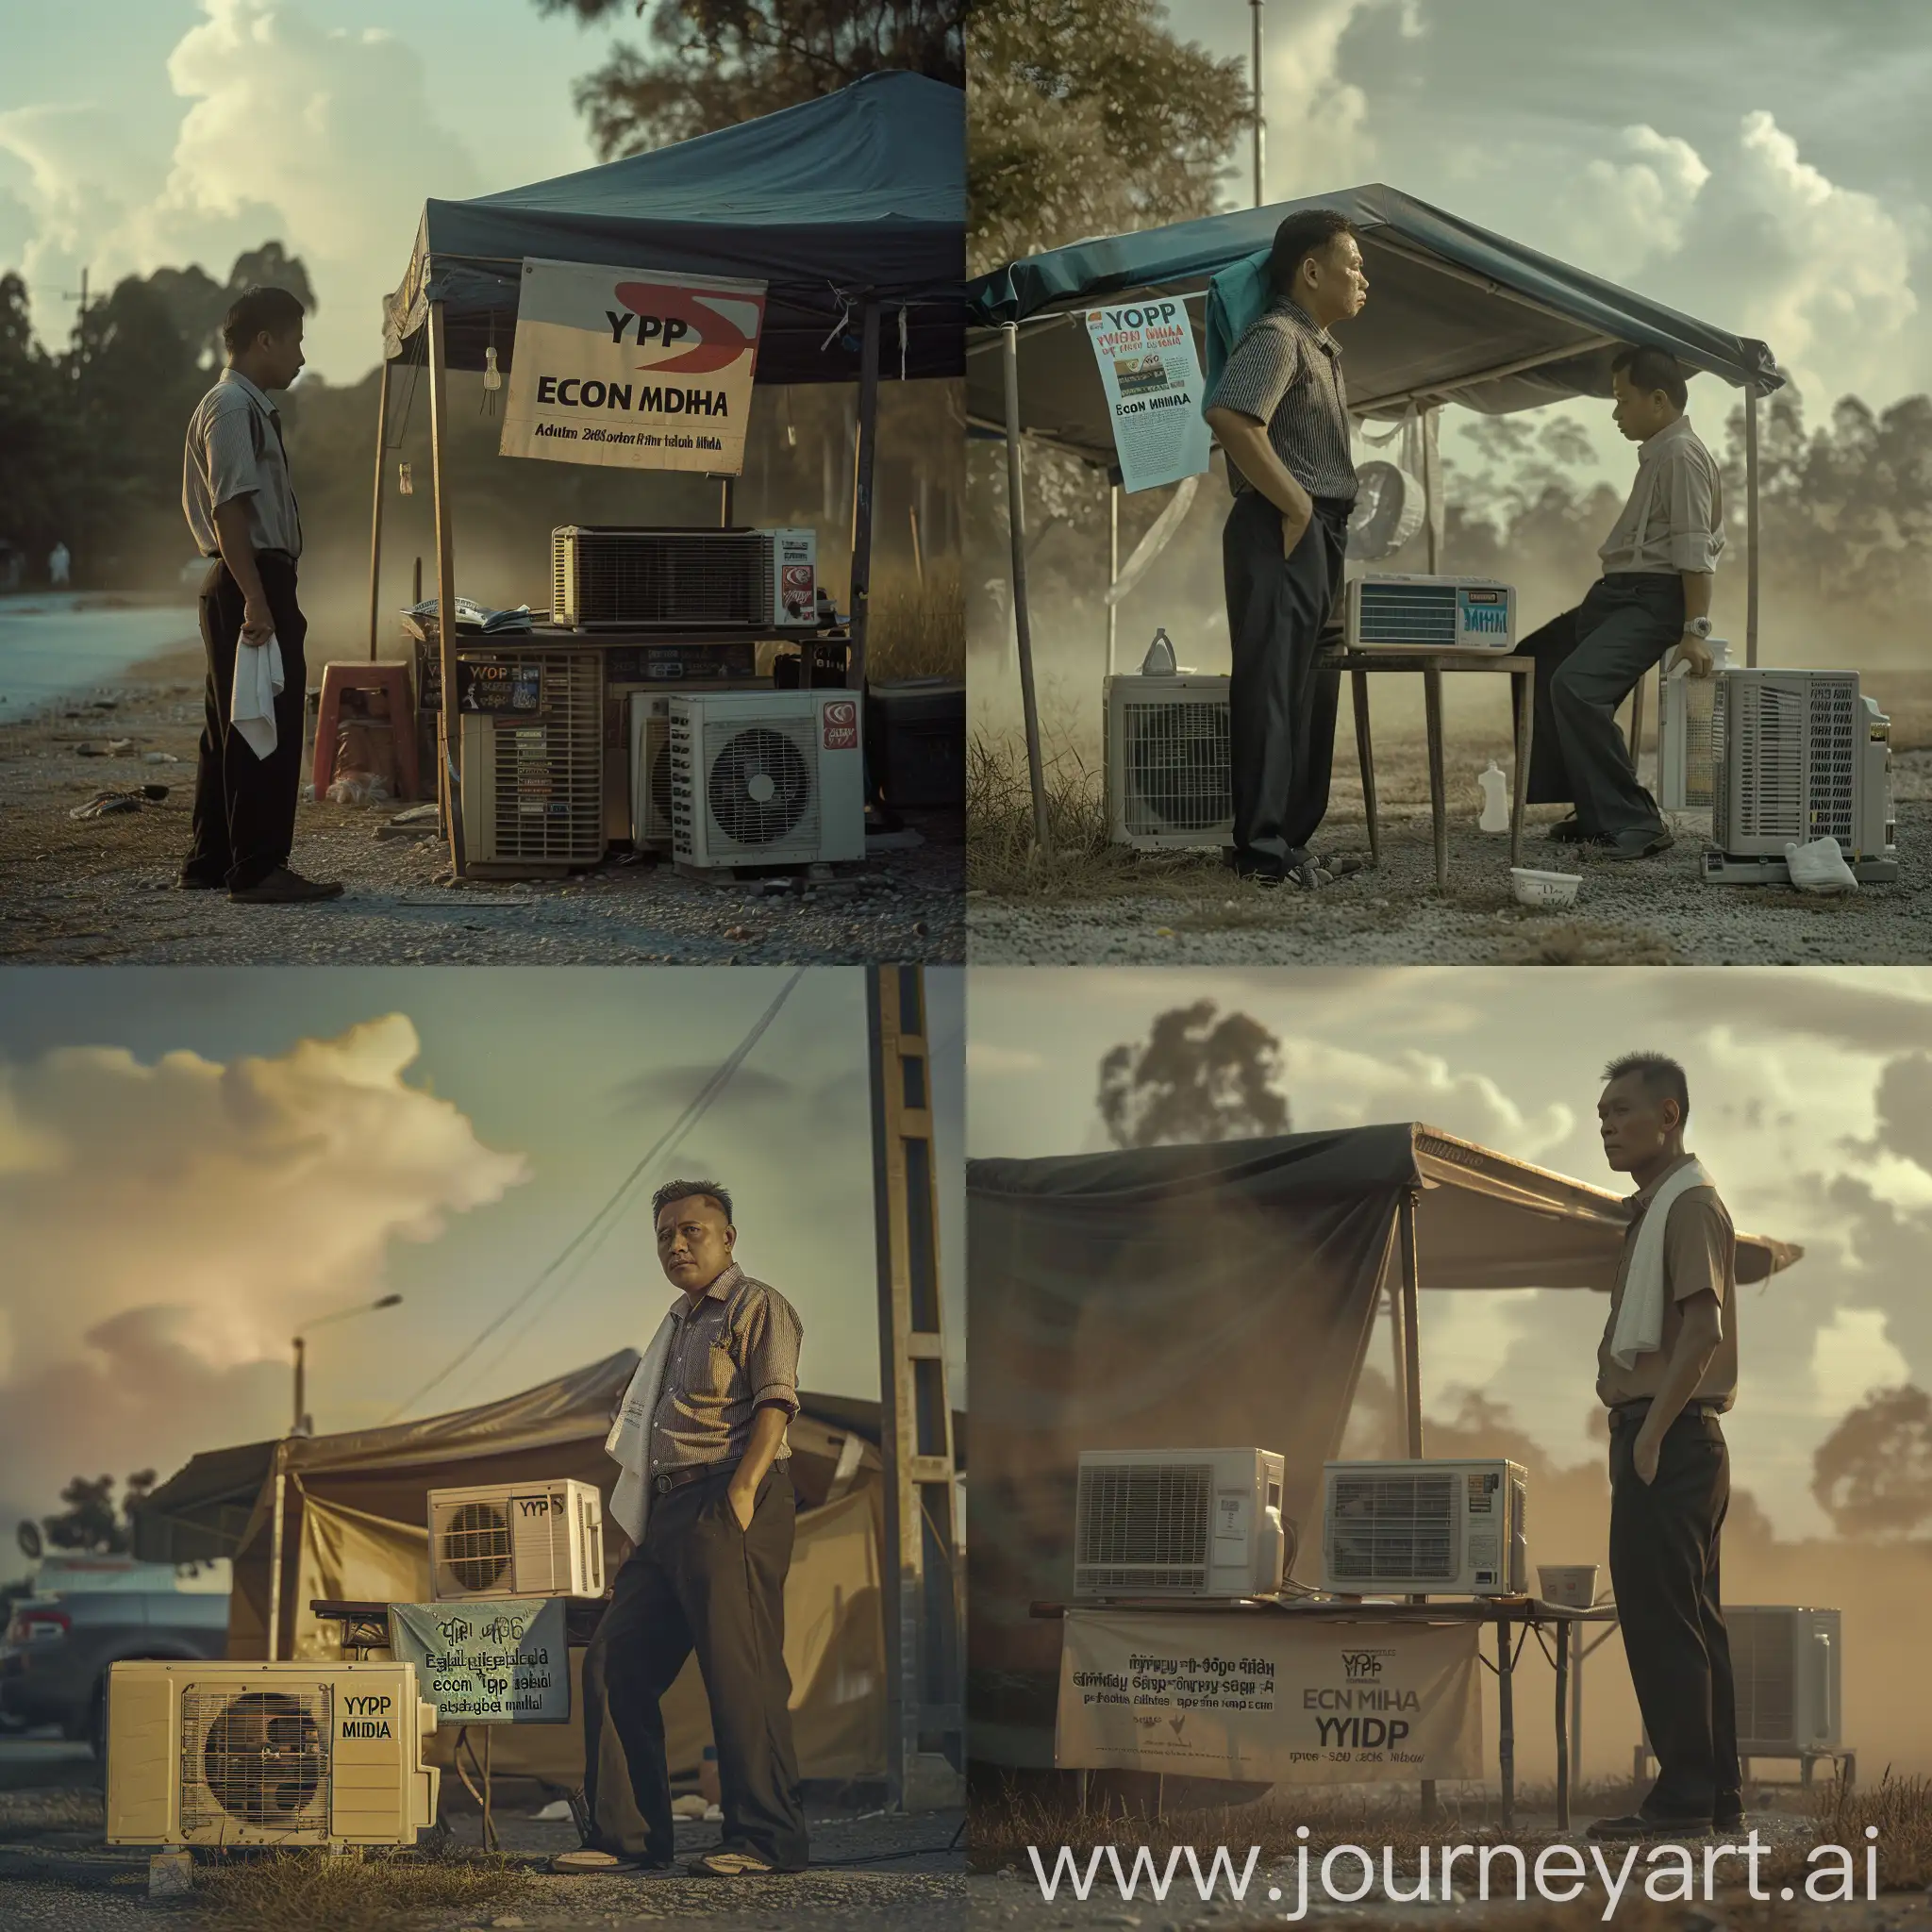 Malay-Man-Selling-Air-Conditioners-Under-Small-Tent-at-Dusk